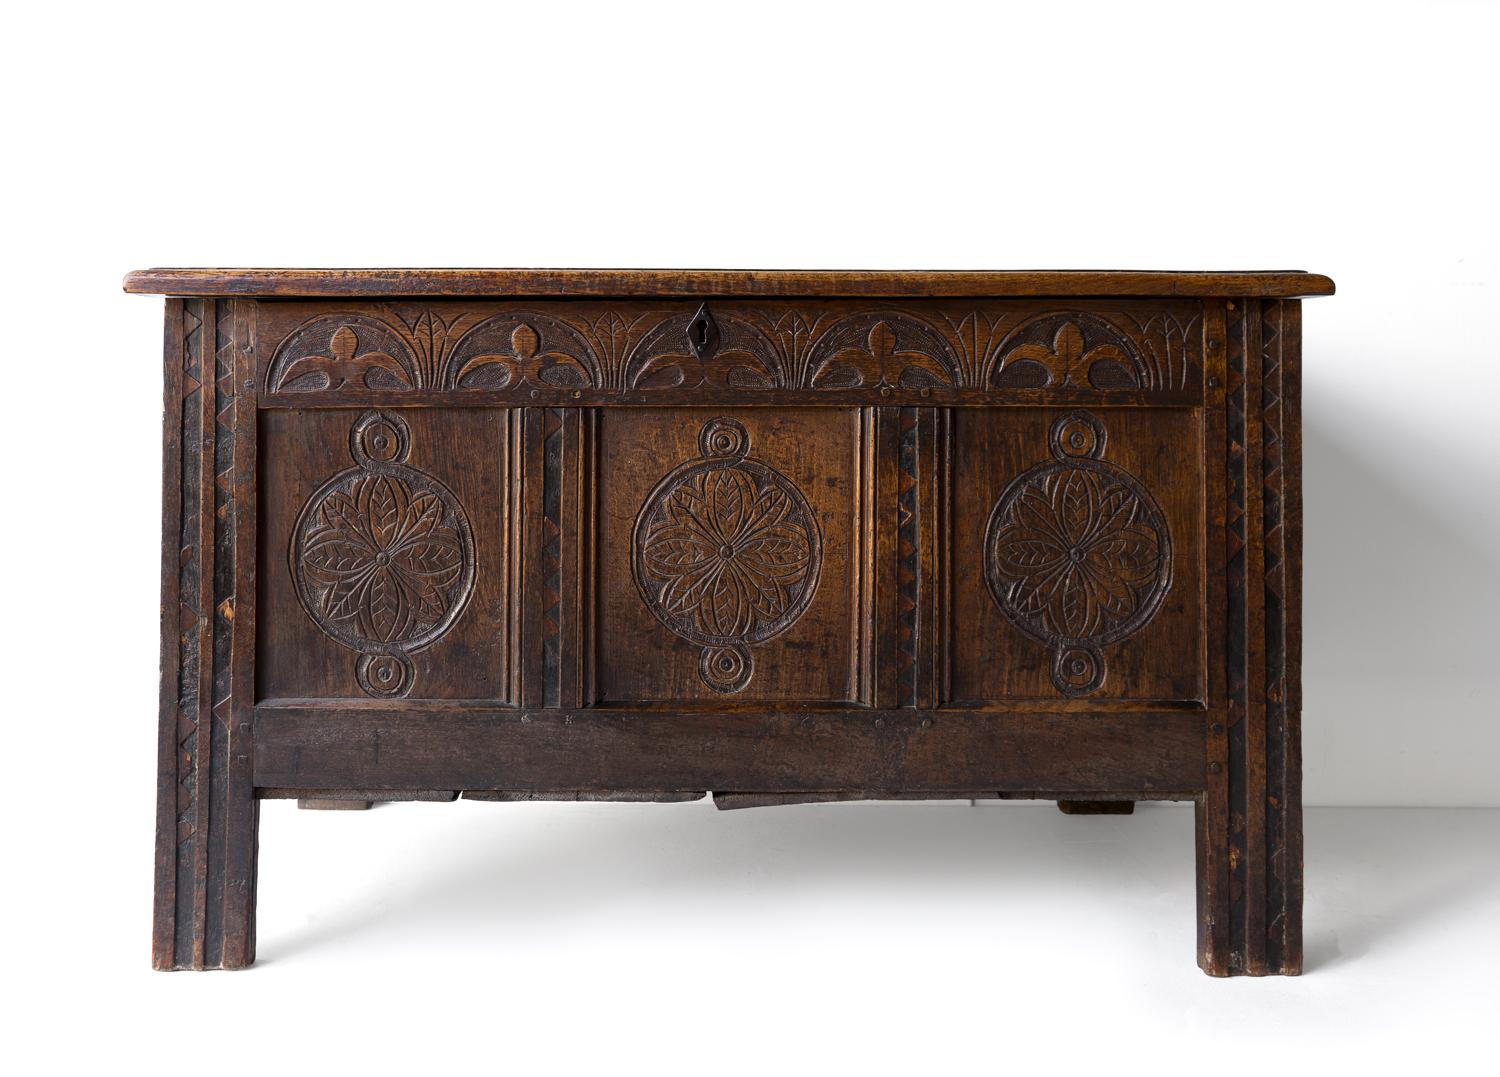 Antique Charles II West Country Carved Oak Coffer 17th Century Blanket Box Chest In Good Condition For Sale In Bristol, GB